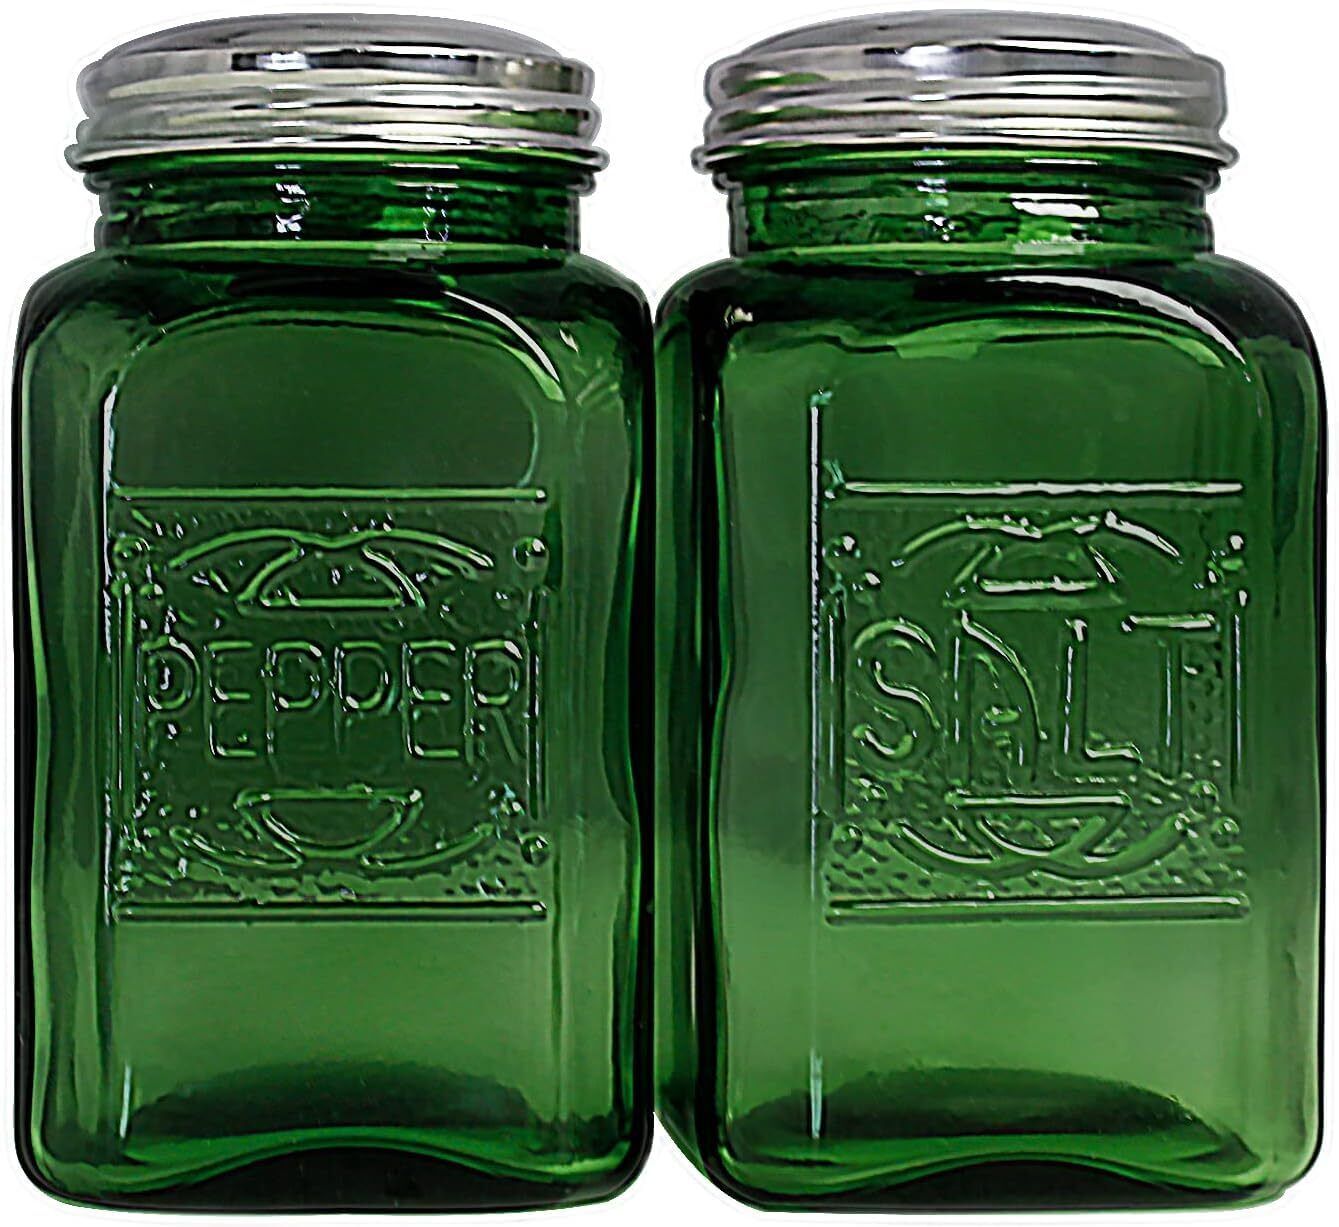 Kerixi Vintage Salt and Pepper Shakers (Green, Large)